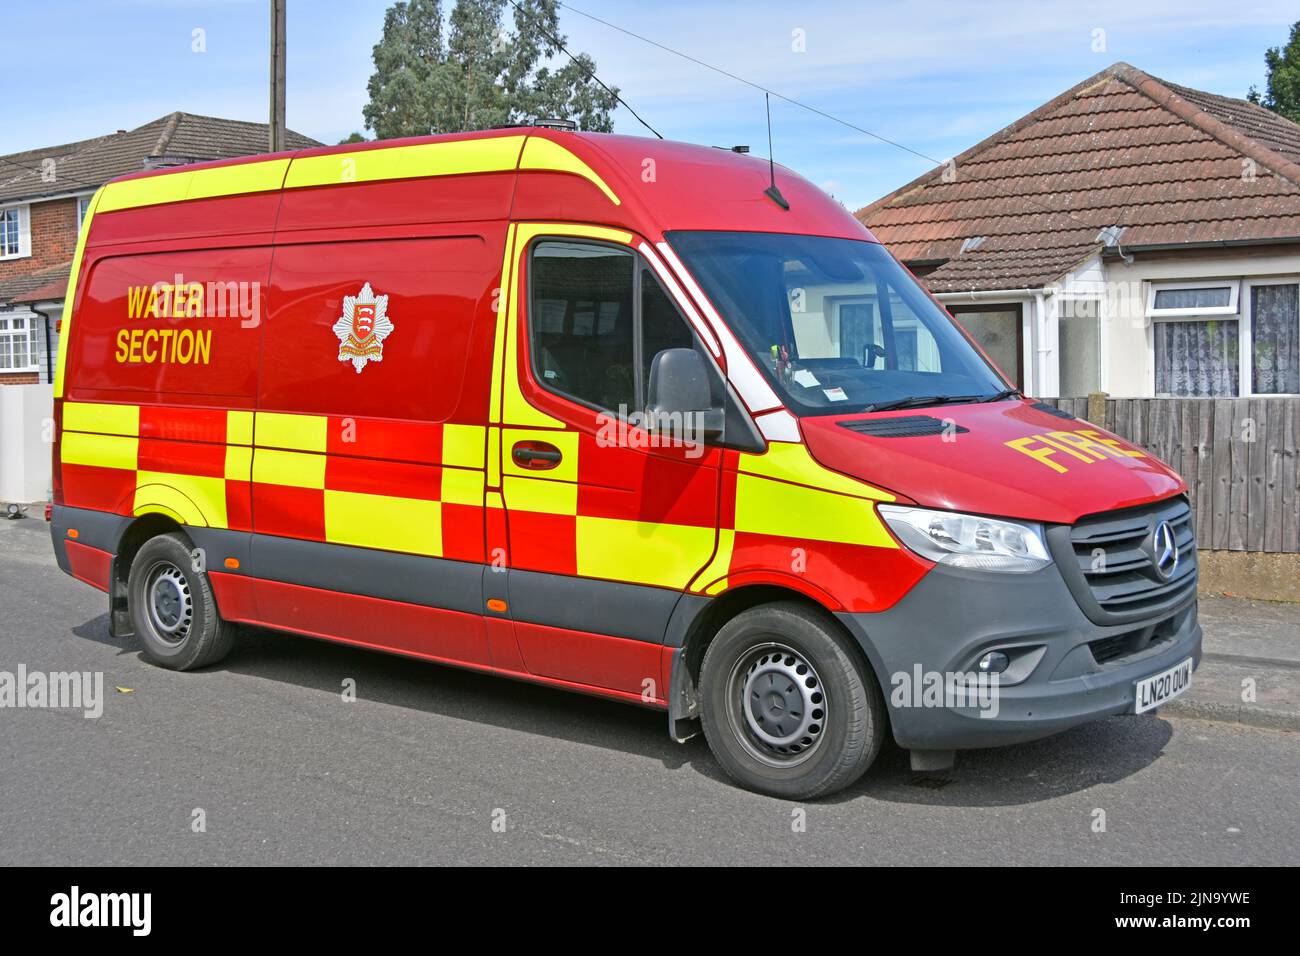 Essex Fire and Rescue Service Water Section a Mercedes fire brigade red van at locations to maintain street fire hydrants for any emergency England UK Stock Photo